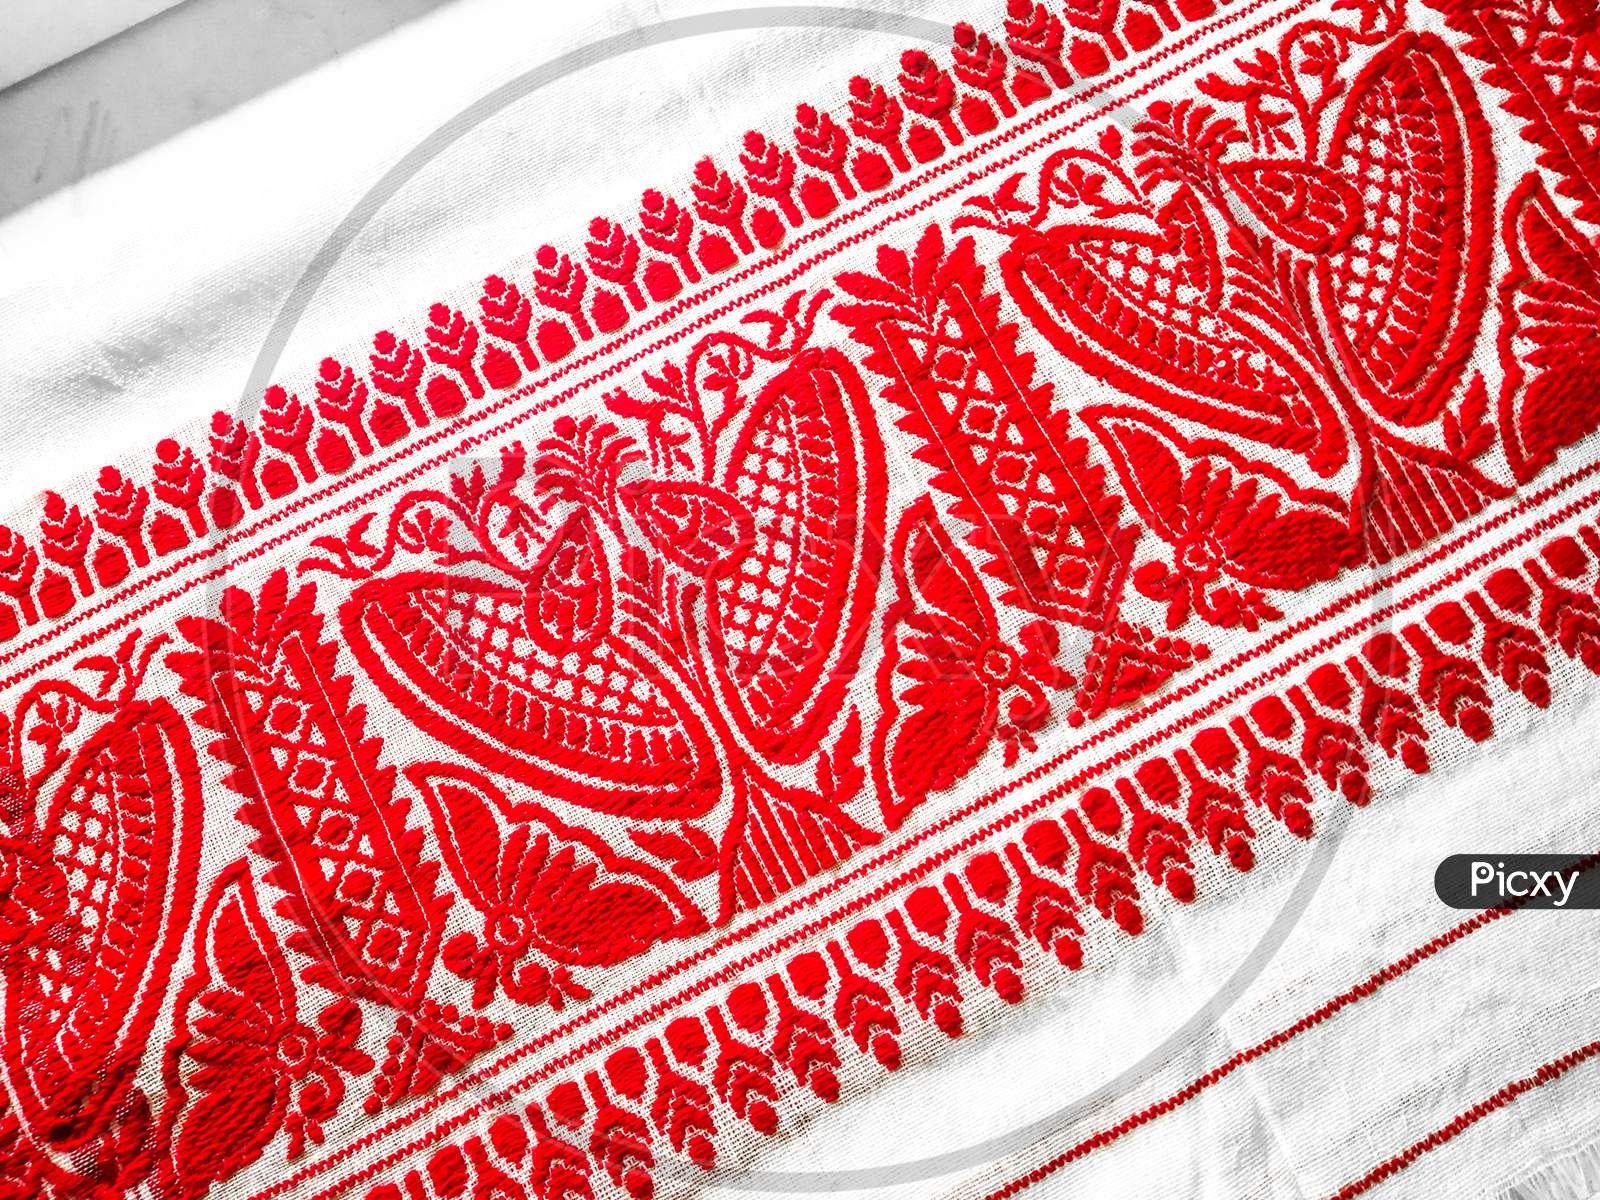 Gamosa (Gamocha/ Gamusa) is a unique identity of Assamese Society. This small piece of cloth with floral design has high esteem and wide usage in Assamese culture.